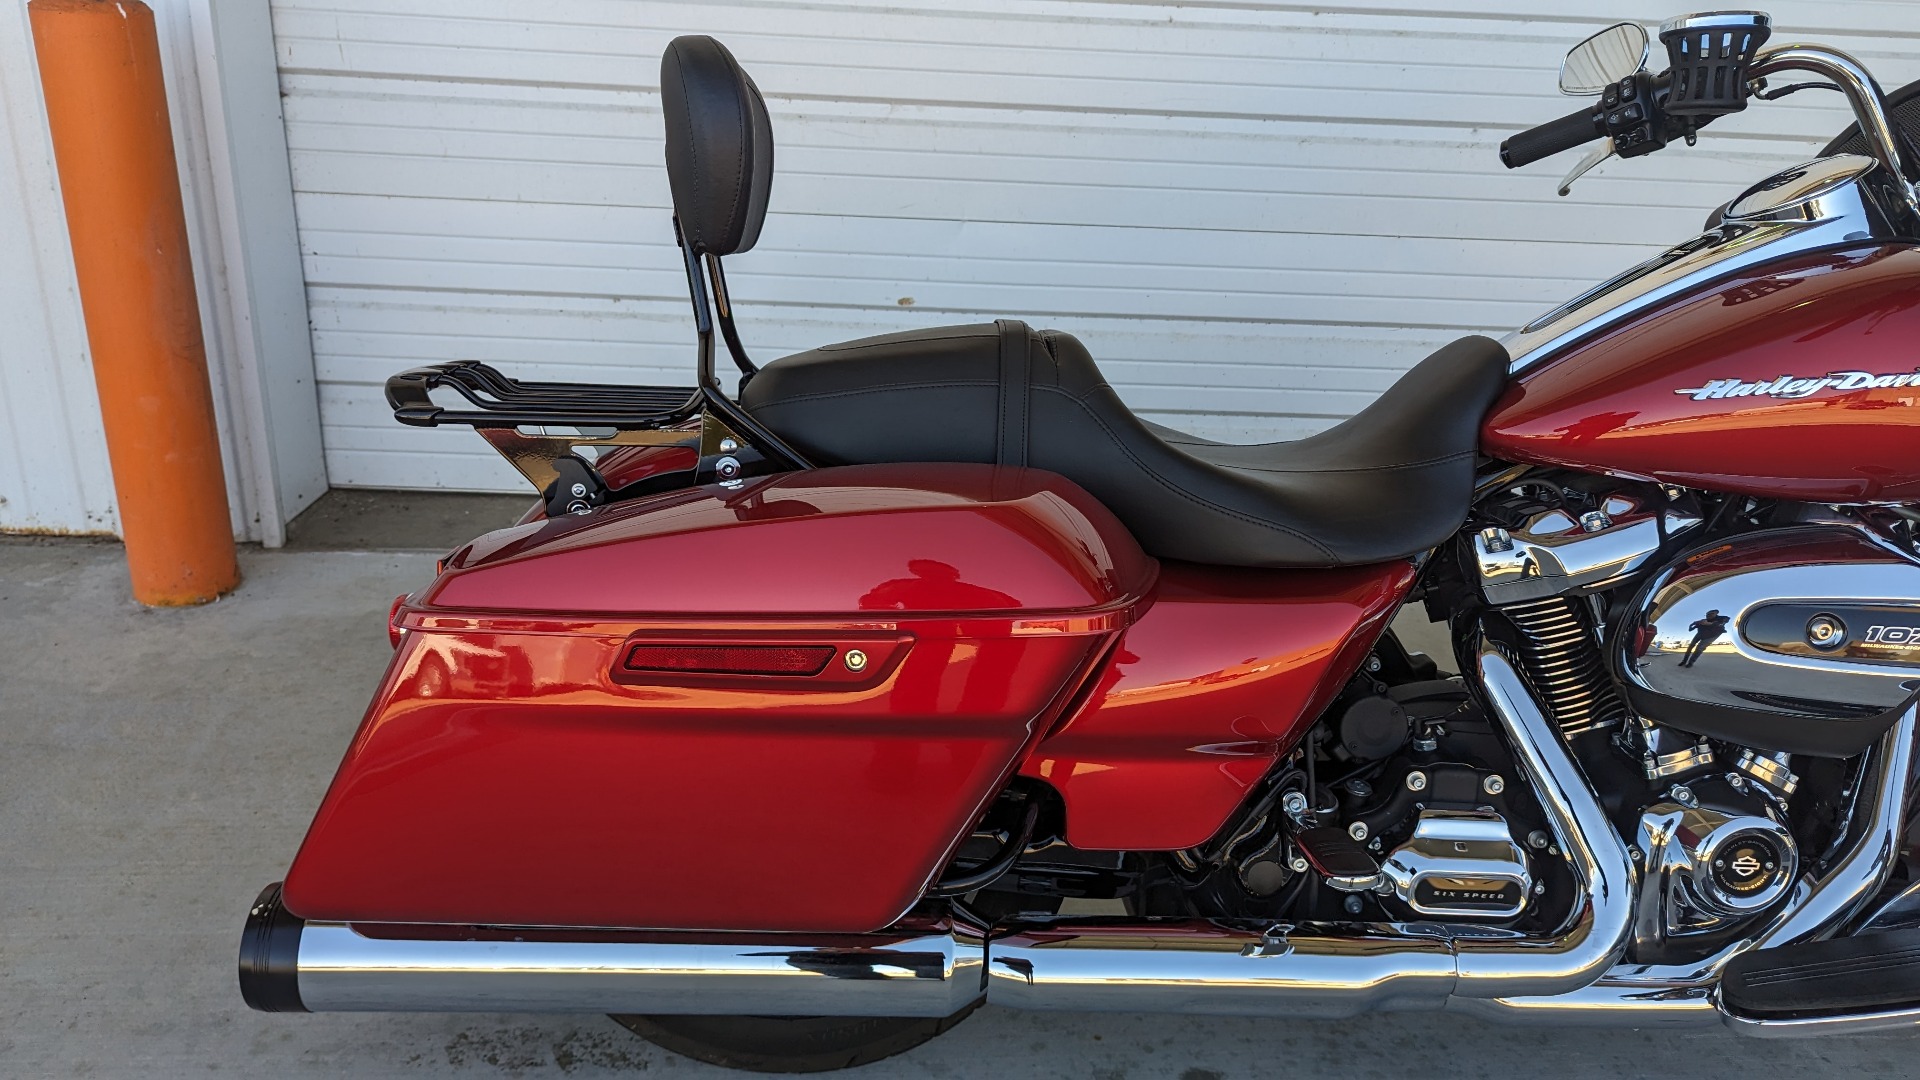 2019 harley davidson road glide wicked red for sale in arkansas - Photo 5